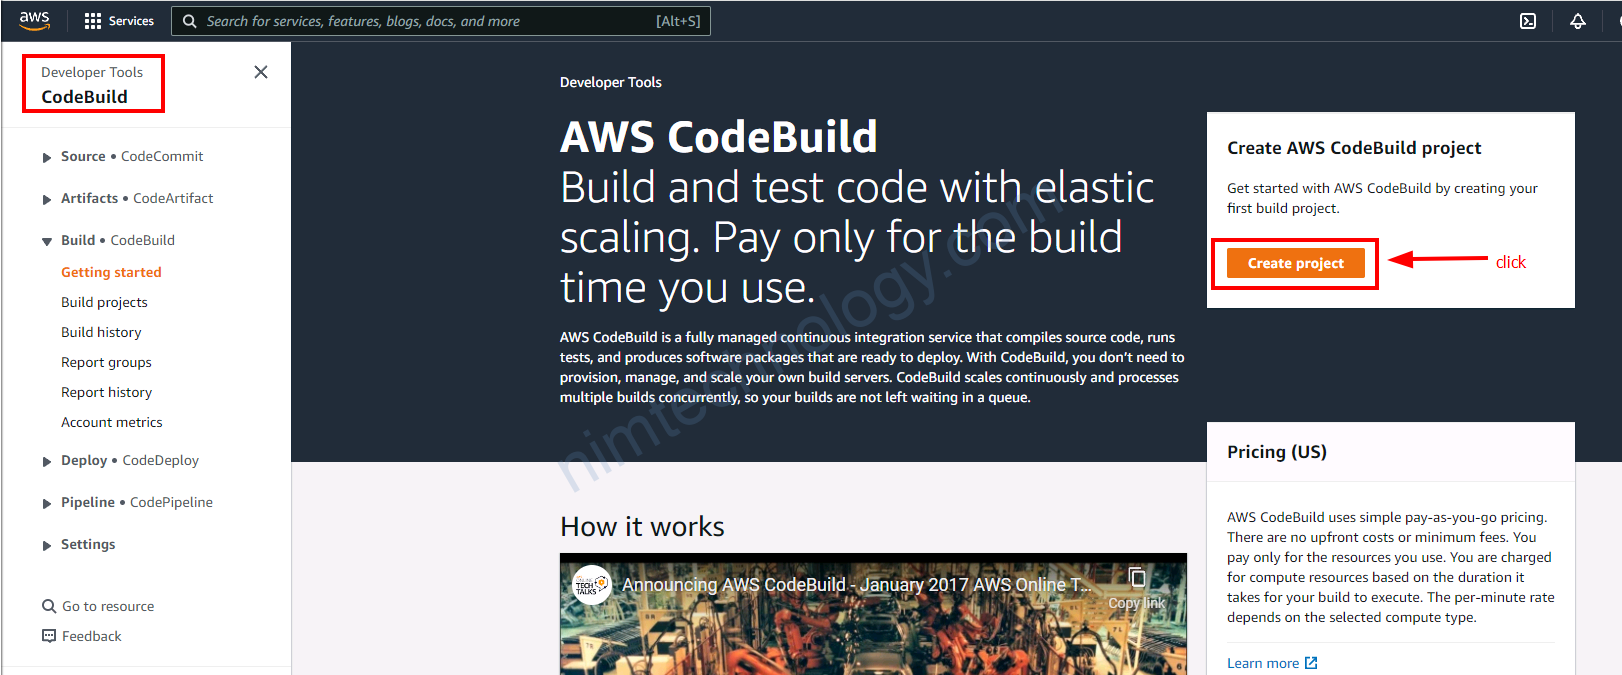 [AWS] Demo “code build” with experiment easily on AWS